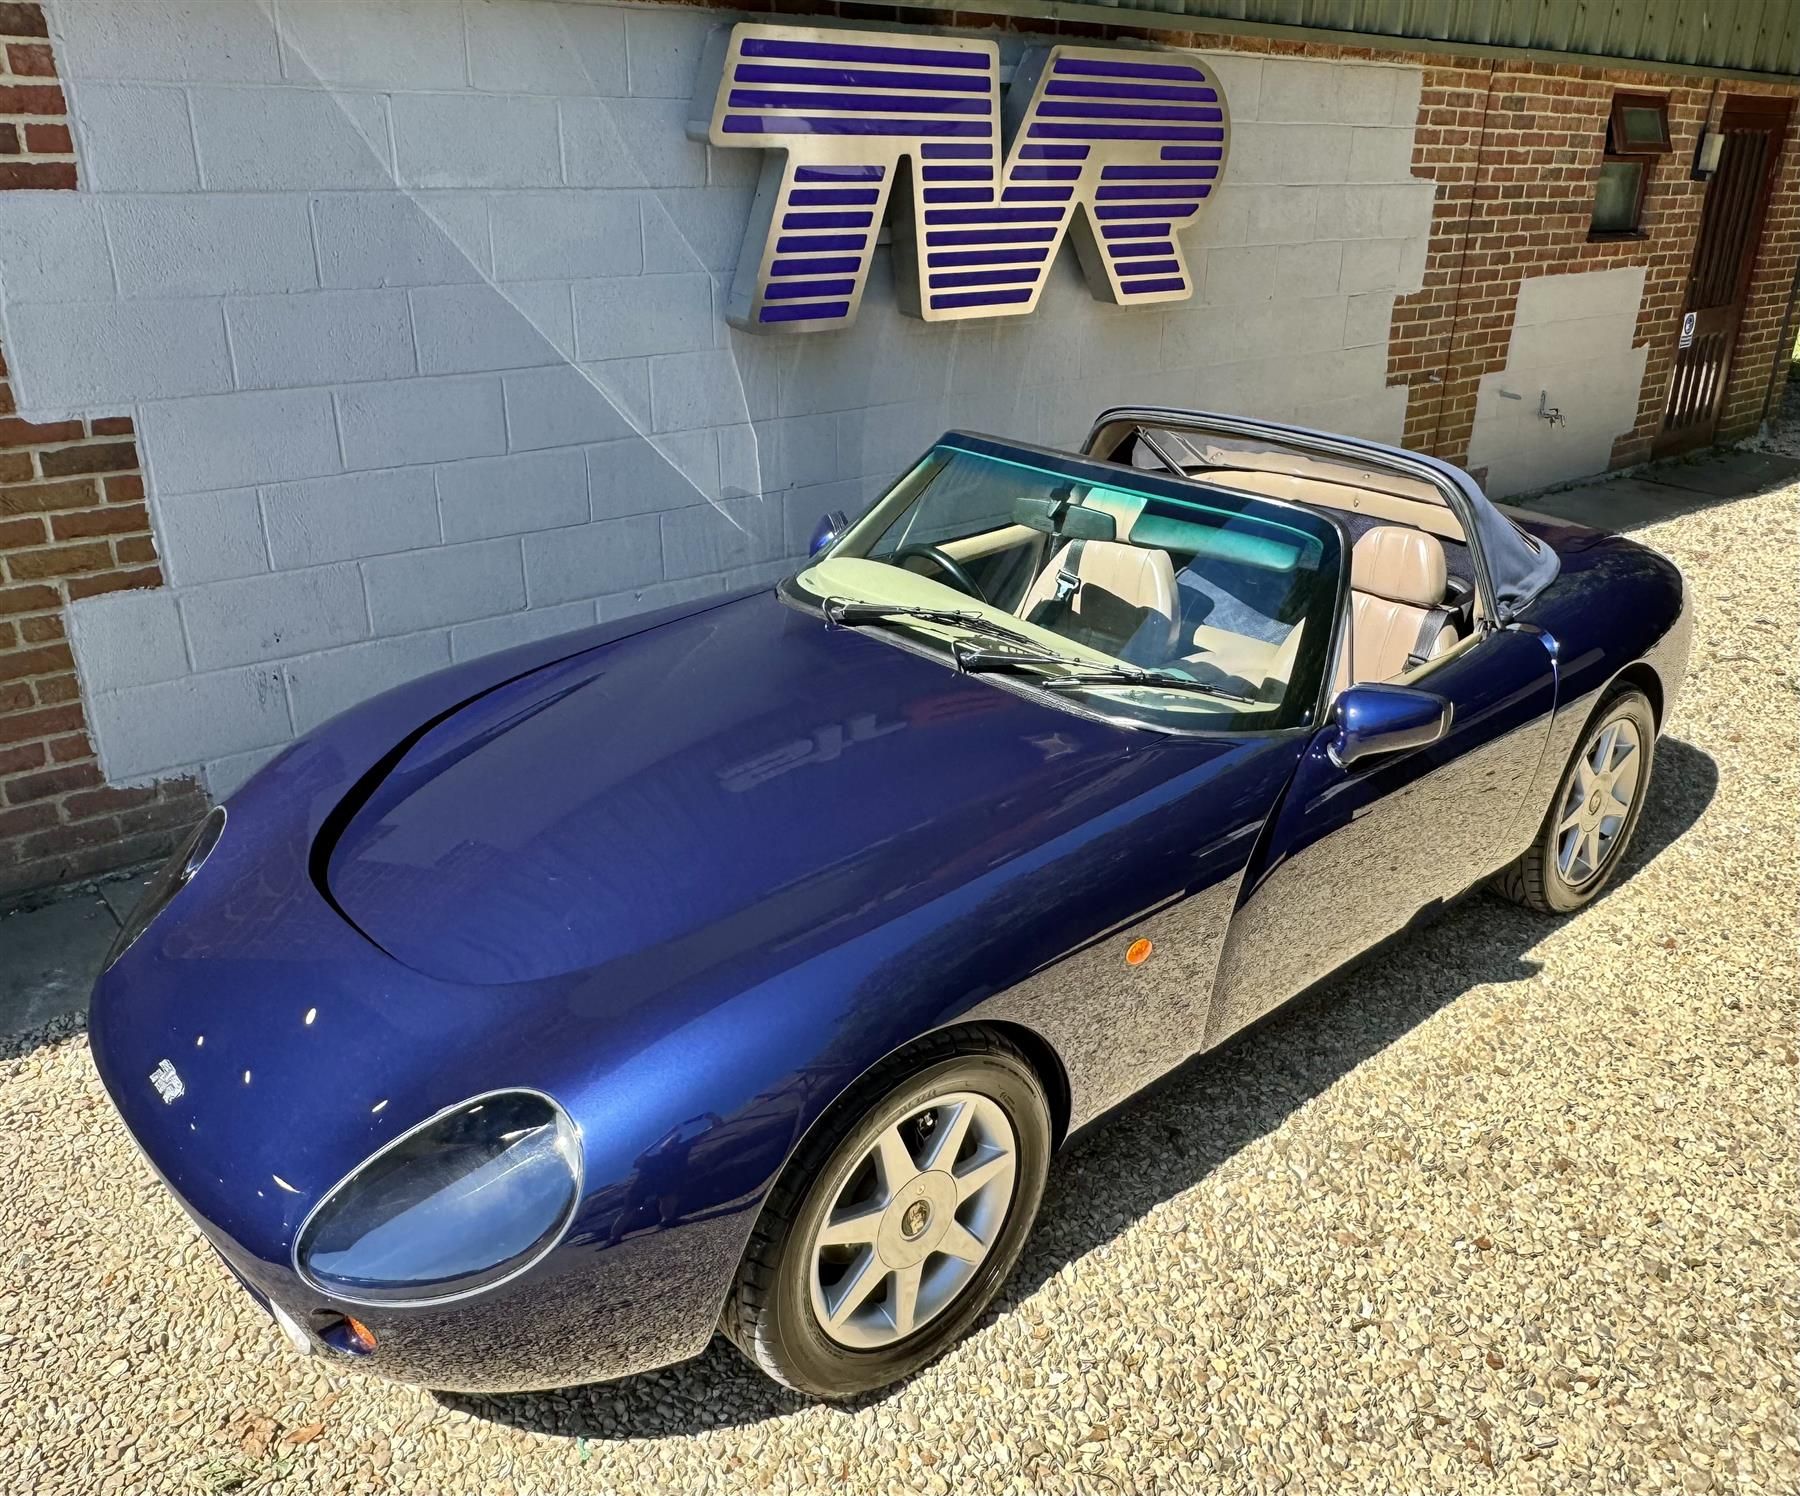 Sold-2000 TVR GRIFFITH 500 V8- “MONTREAL MAGIC”